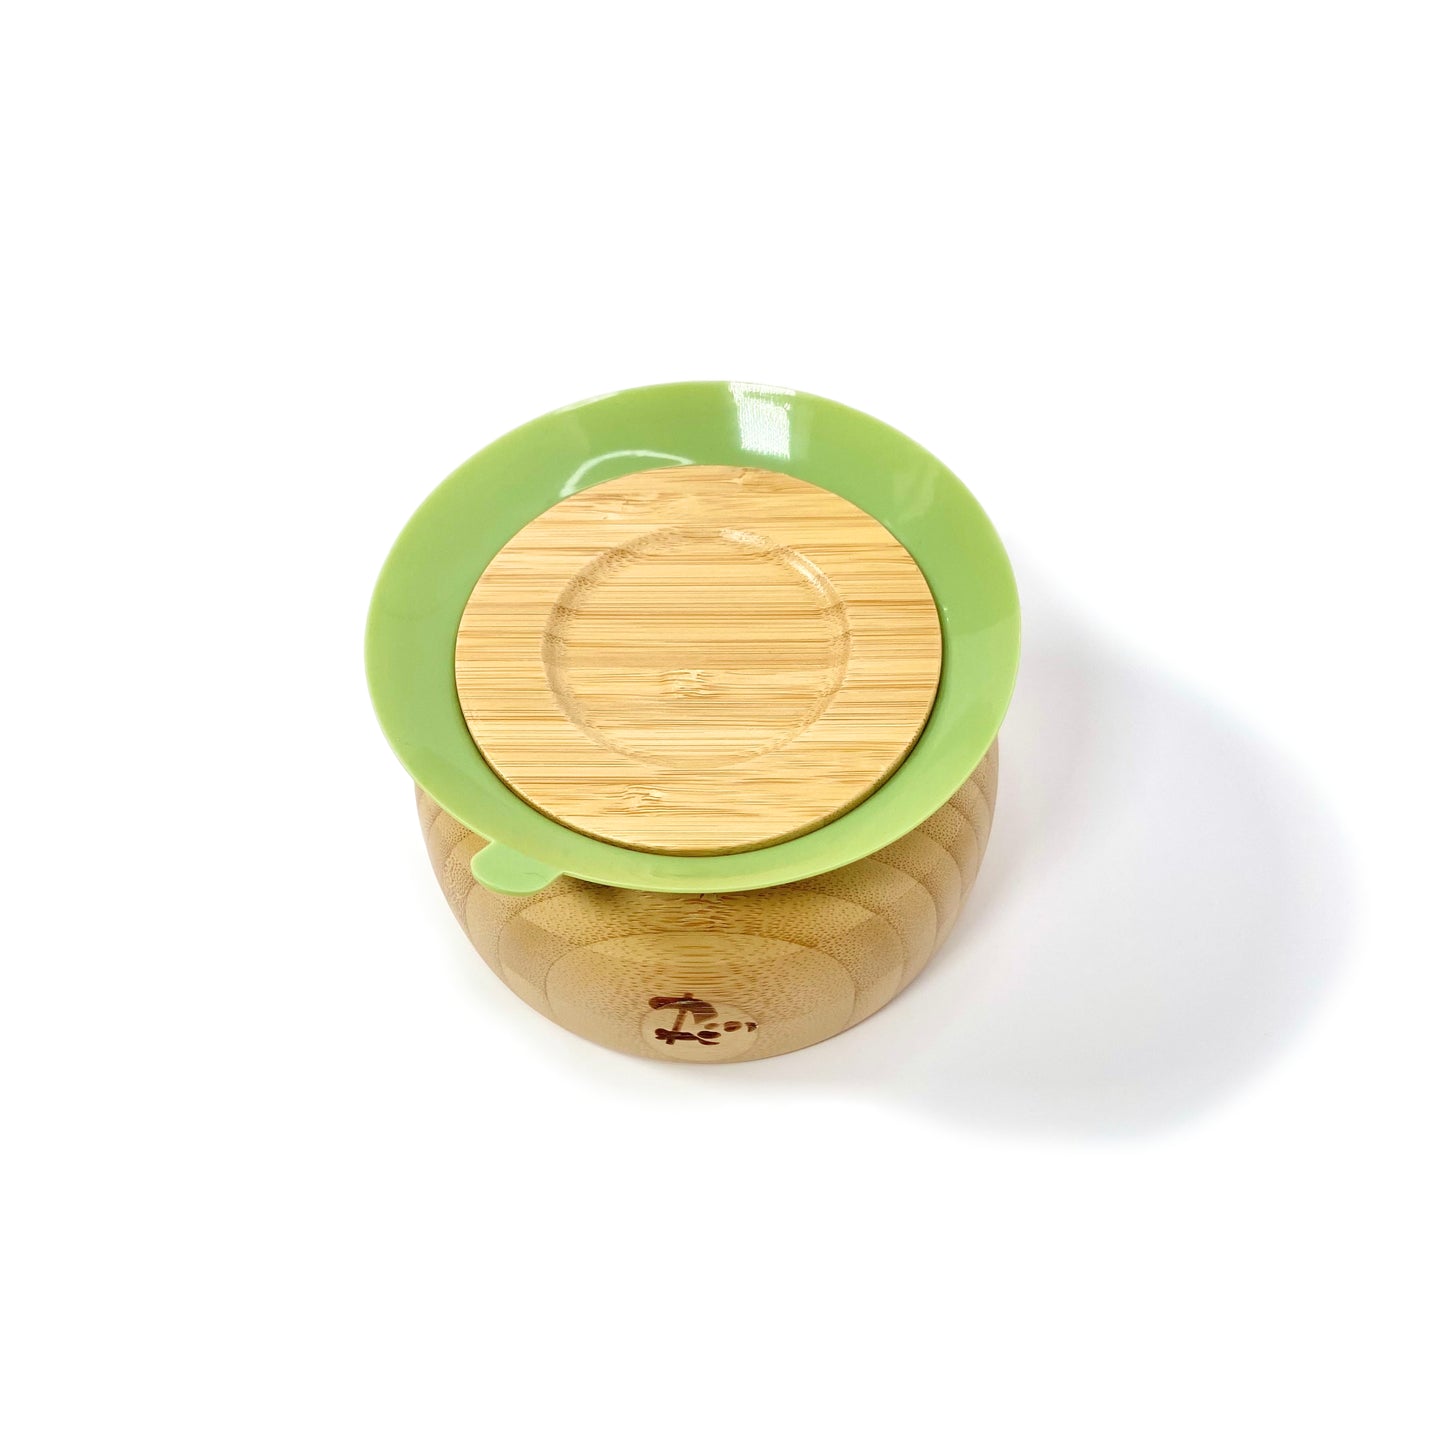 A children’s bamboo bowl with an olive green silicone suction ring. Image shows the underside of the bowl, featuring the silicone suction ring.